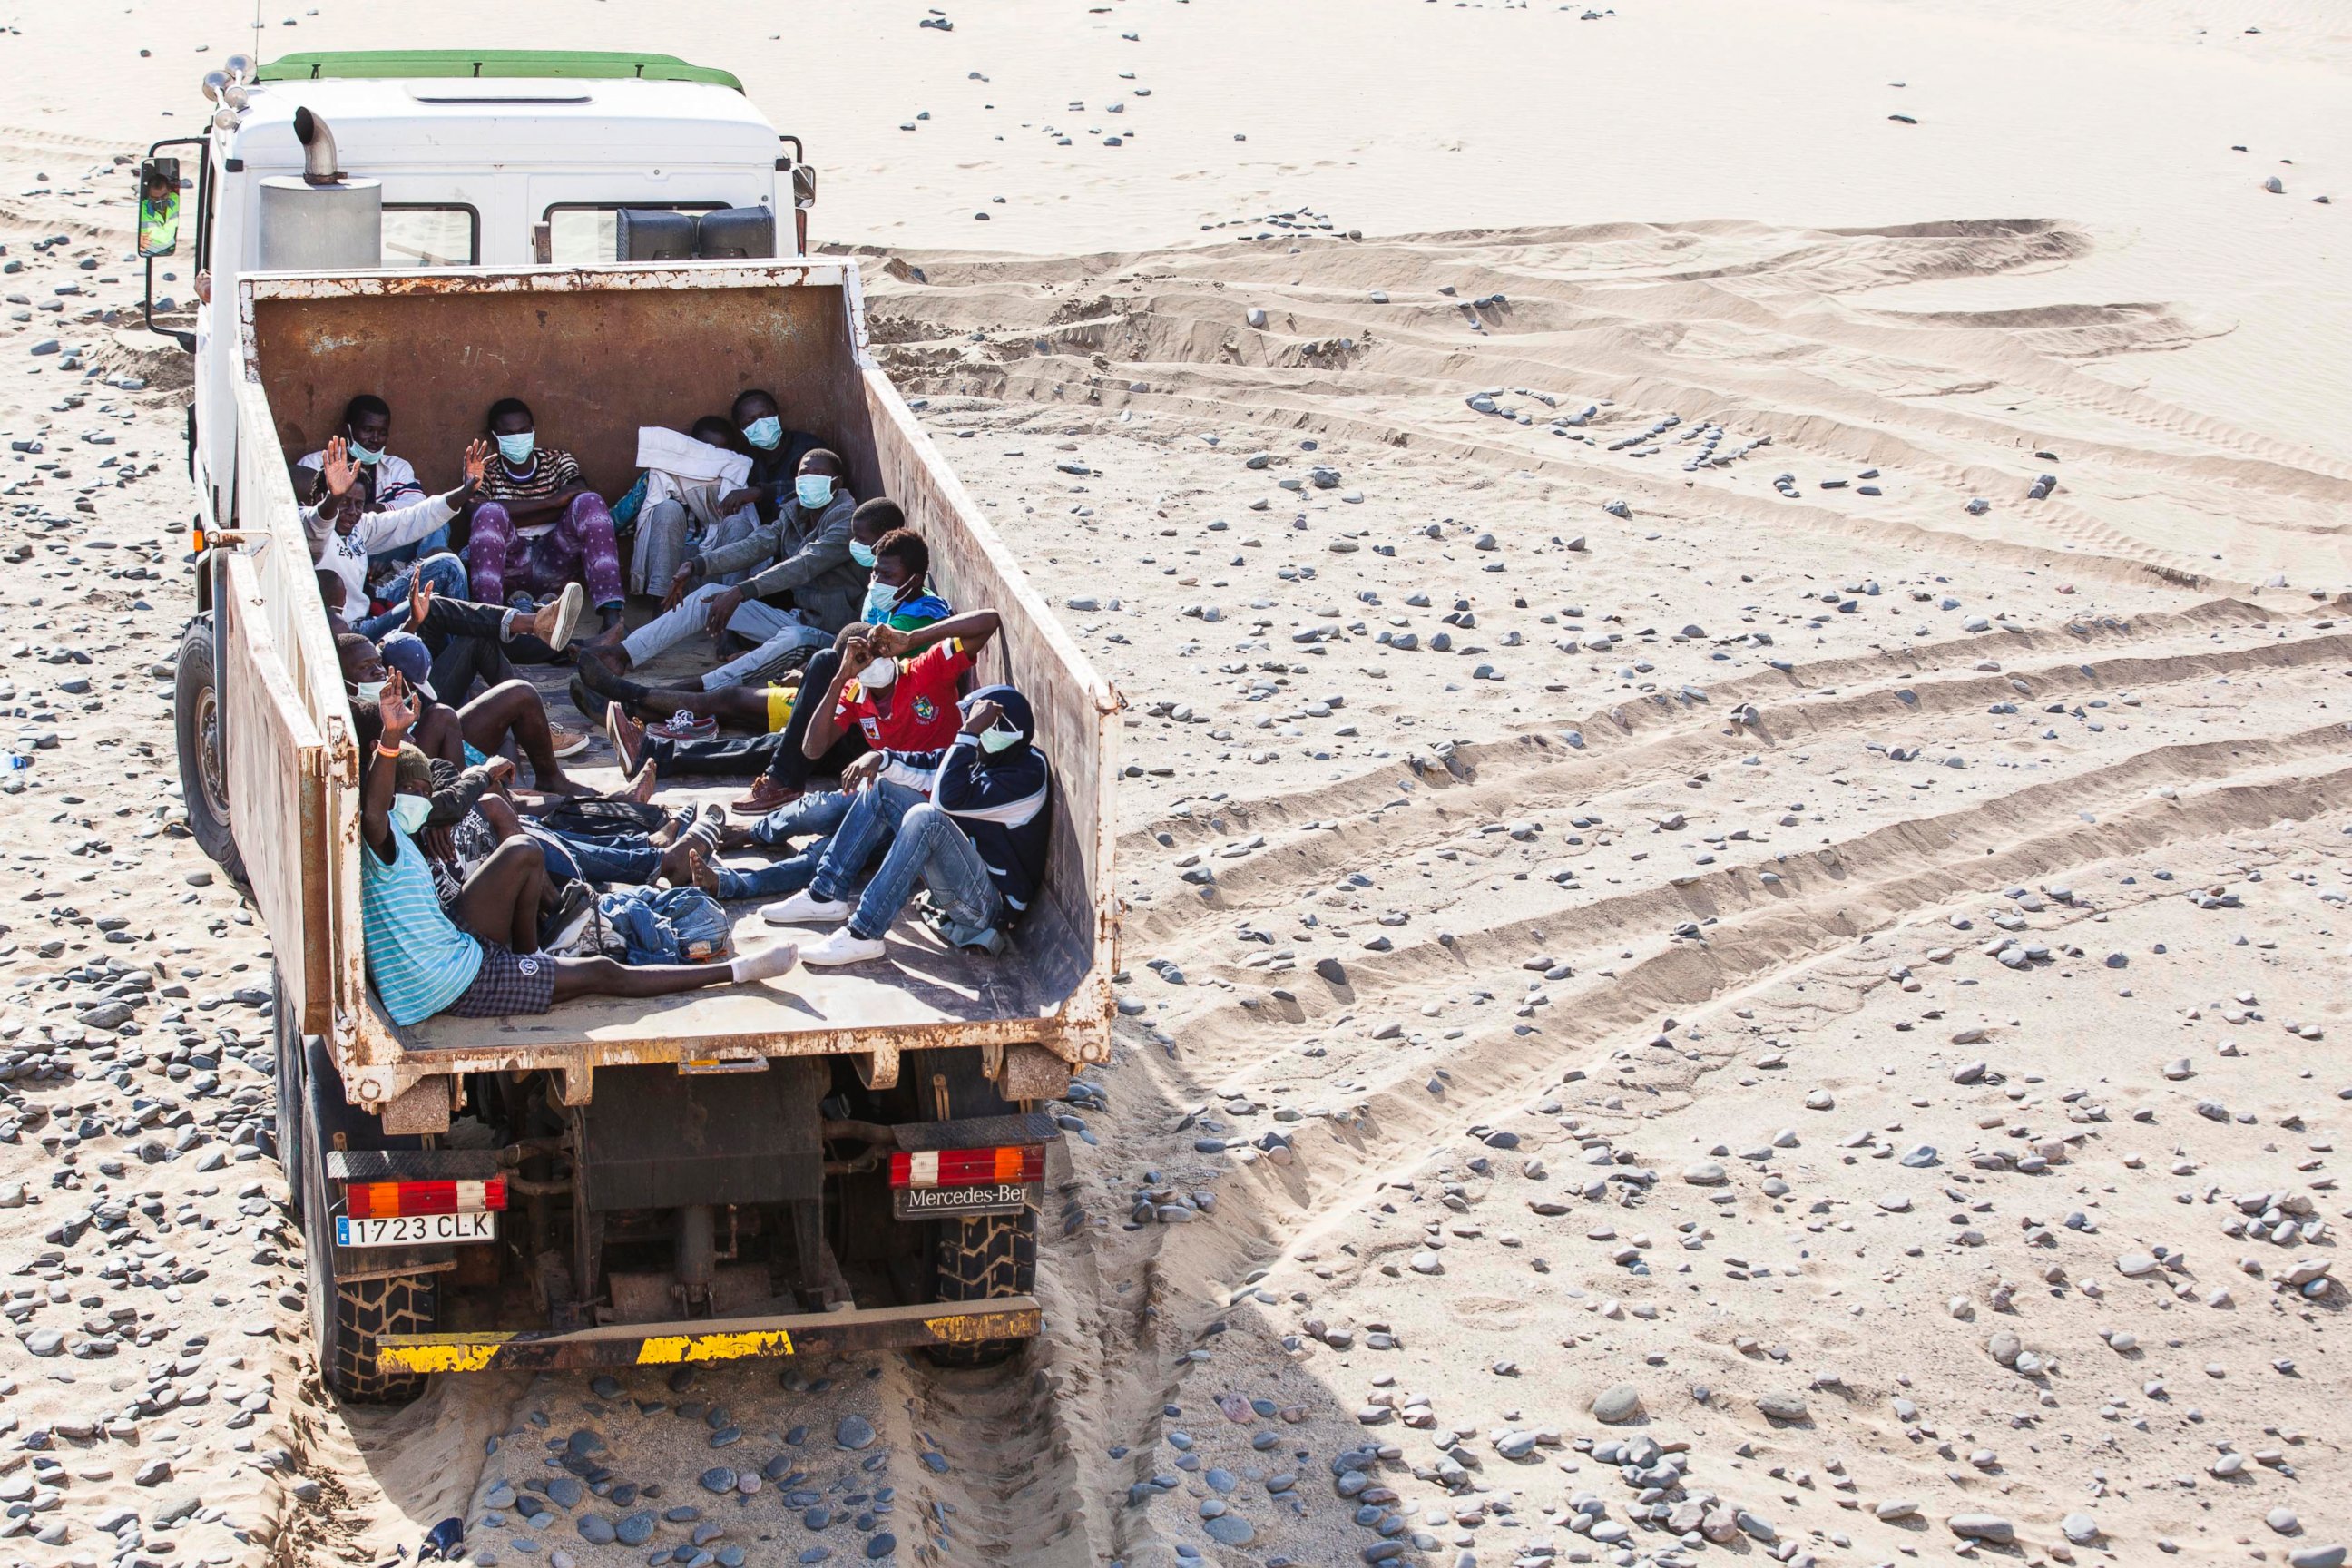 PHOTO: People who arrived on a fishing boat sit inside a truck at Maspalomas beach on Gran Canaria in Spain's Canary Islands, Nov. 5, 2014. 